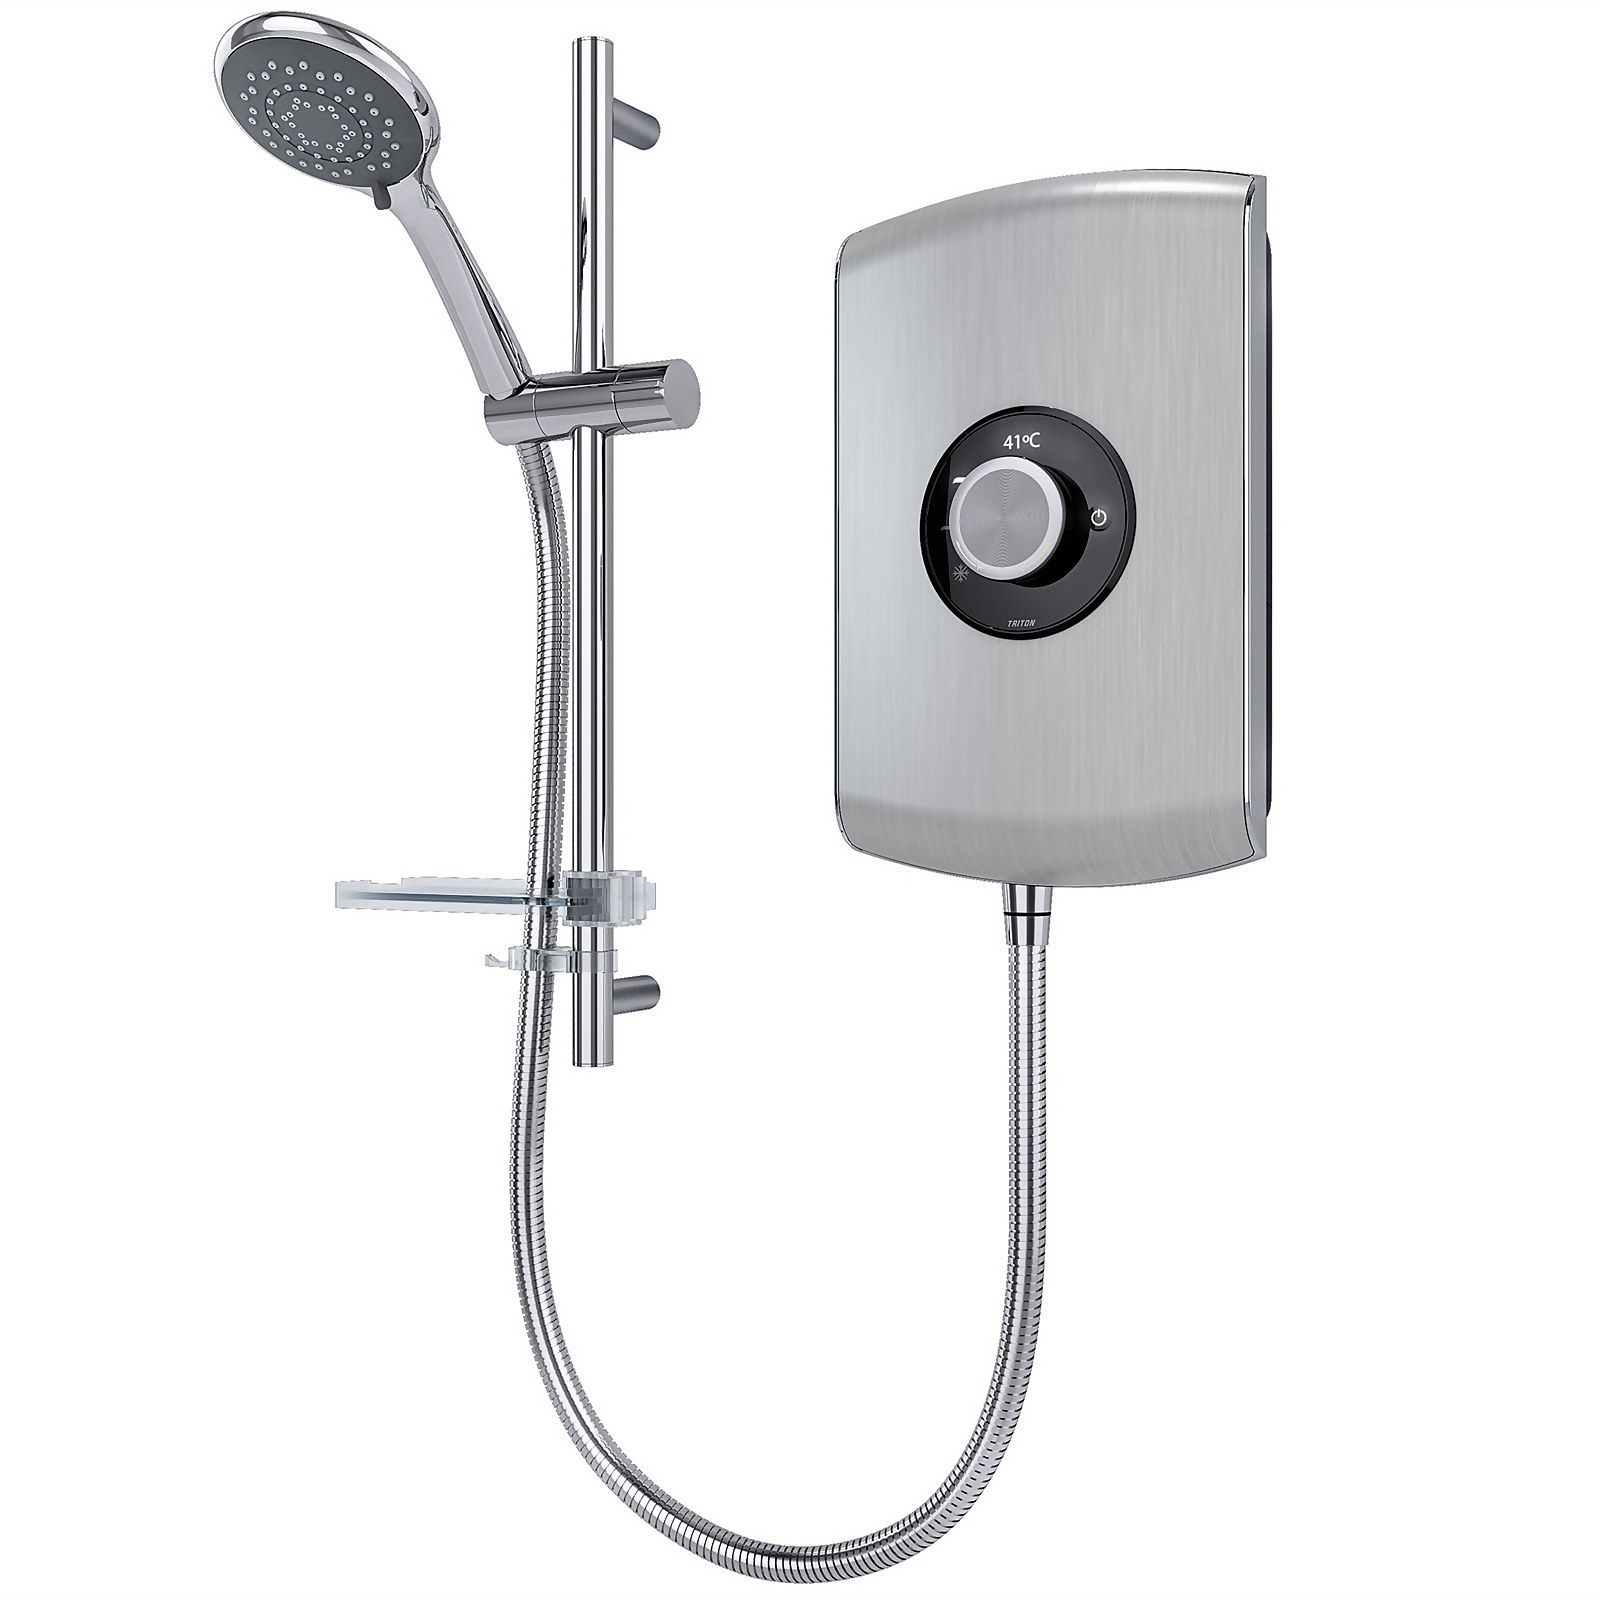 Photo of Amore 9.5kw Electric Shower - Brushed Steel